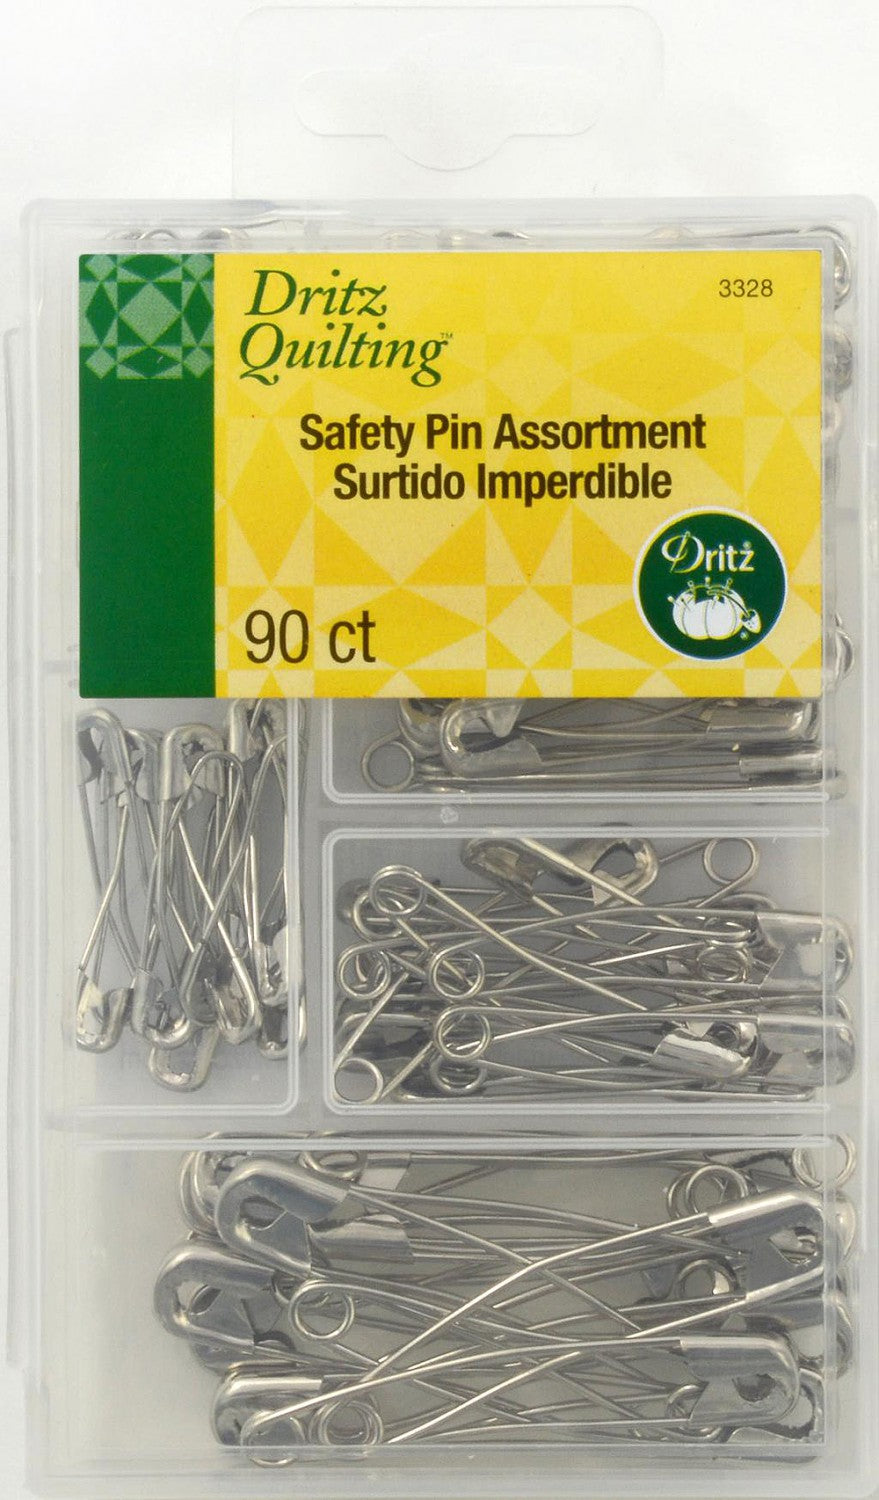 Curved Safety Pin Assortment 90ct (4383865339949)